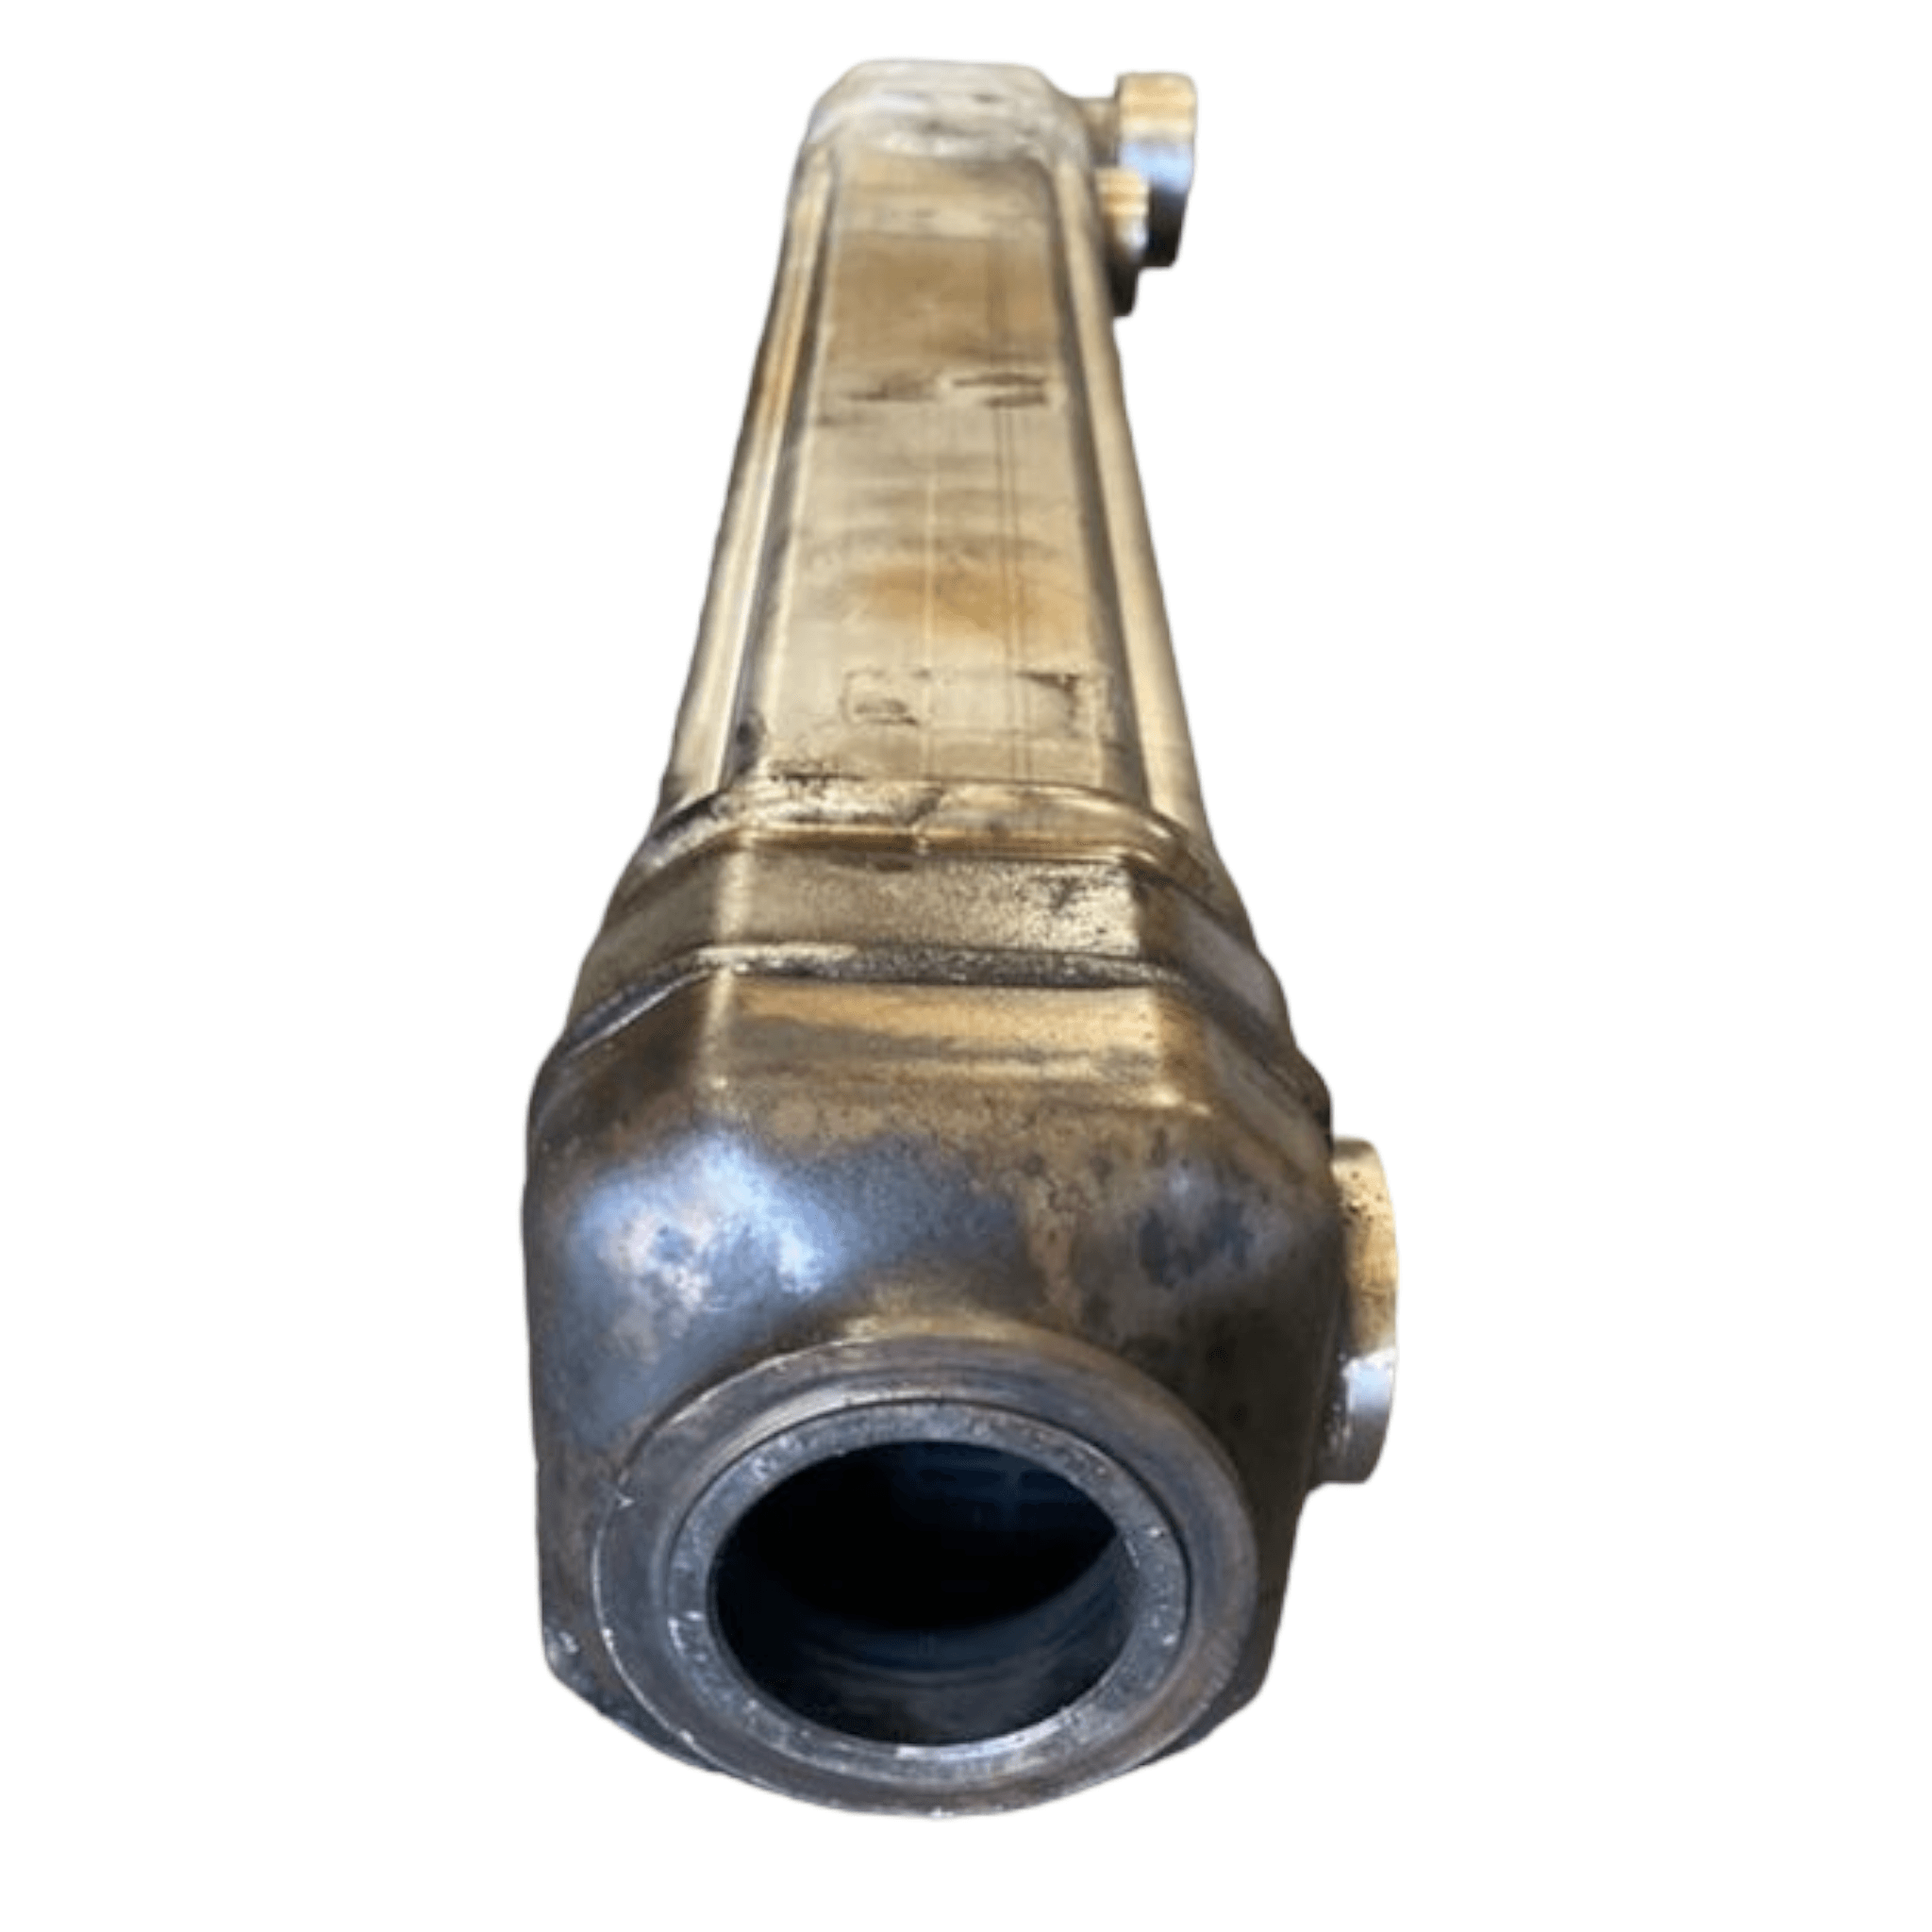 A4731400175 Genuine Detroit Diesel Egr Exhaust Gas Recirculation Cooler Used - ADVANCED TRUCK PARTS